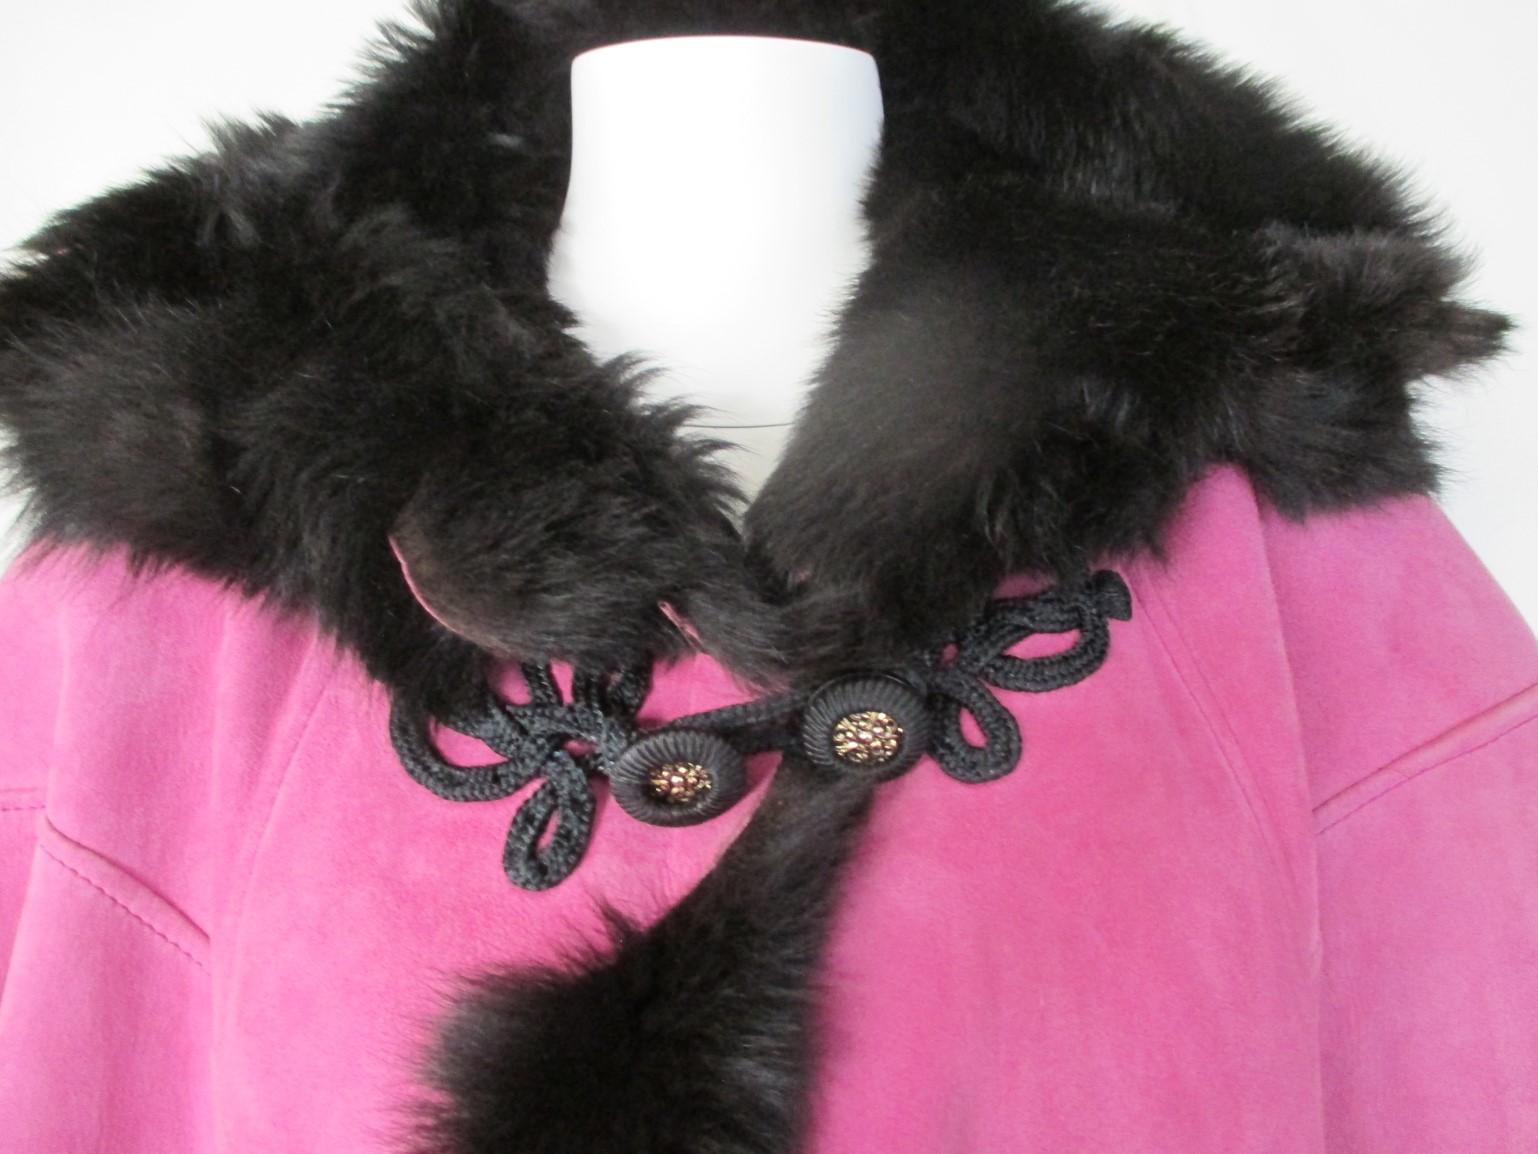 This vintage hooded suede leather cape has 1 closing hook, 2 pockets and is very warm to wear.
Color is pink outside /black inside, made in Italy
The cape is in pre owned condition.
Size is M/L 

note that vintage items are not new and therefore